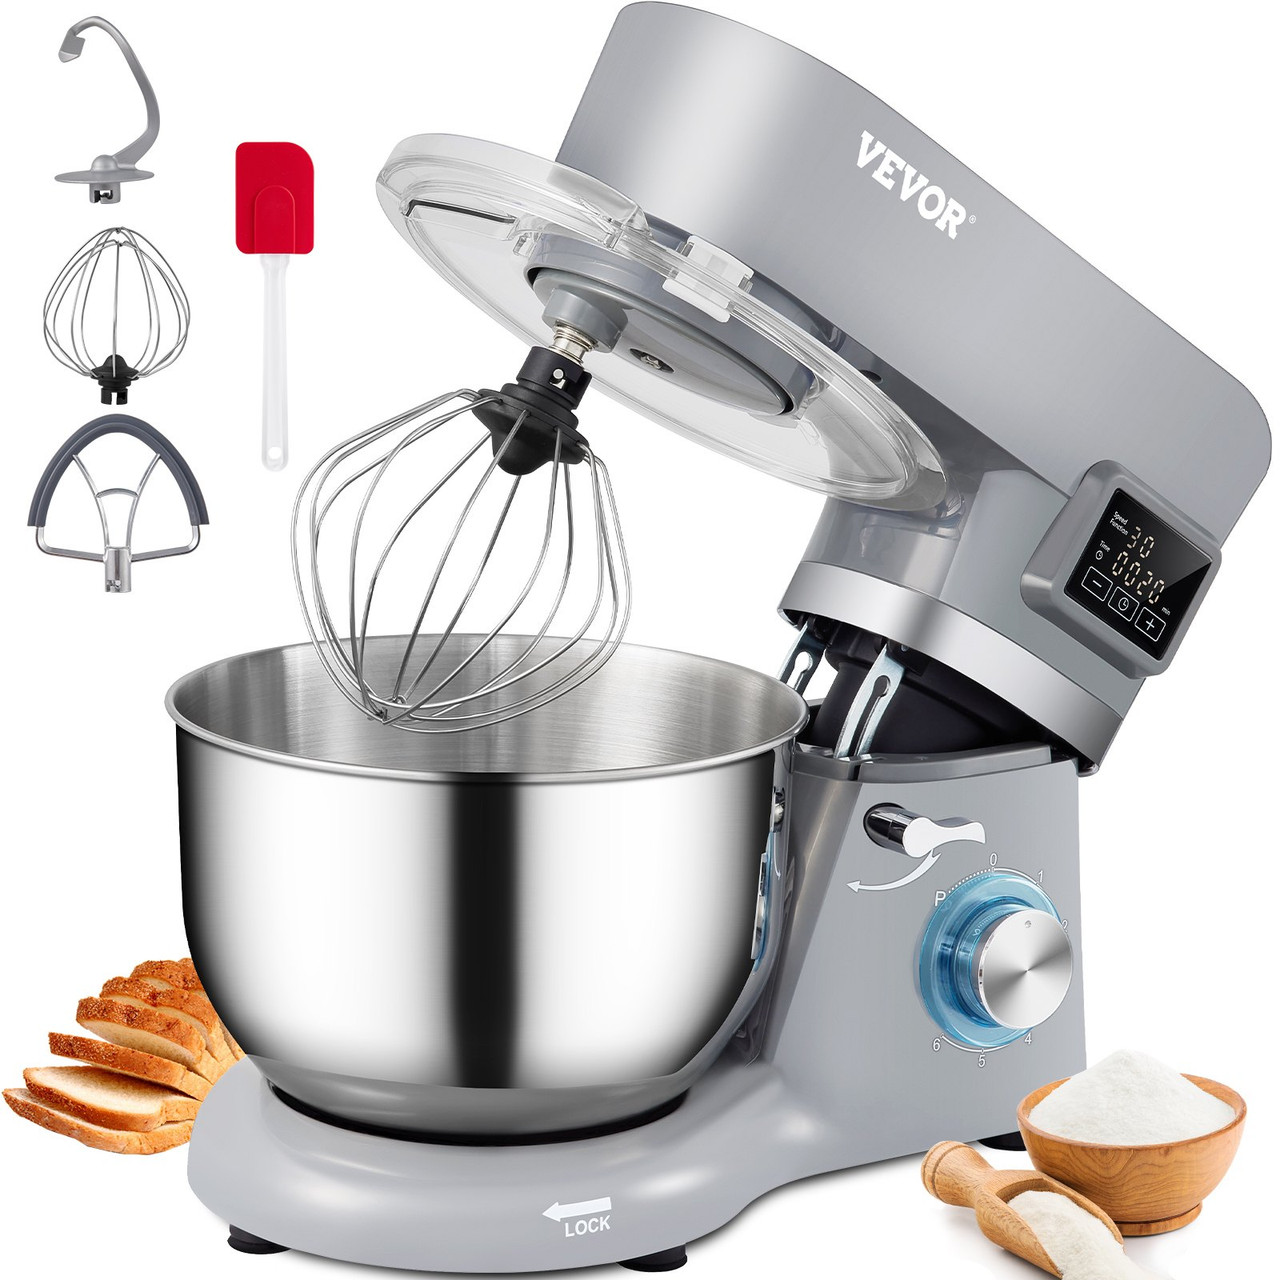 Stand Mixer, 660W Electric Dough Mixer with 6 Speeds LCD Screen Timing, Tilt-Head Food Mixer with 5.8 Qt Stainless Steel Bowl, Dough Hook, Flat Beater, Whisk, Scraper, Splash-Proof Cover - Gray